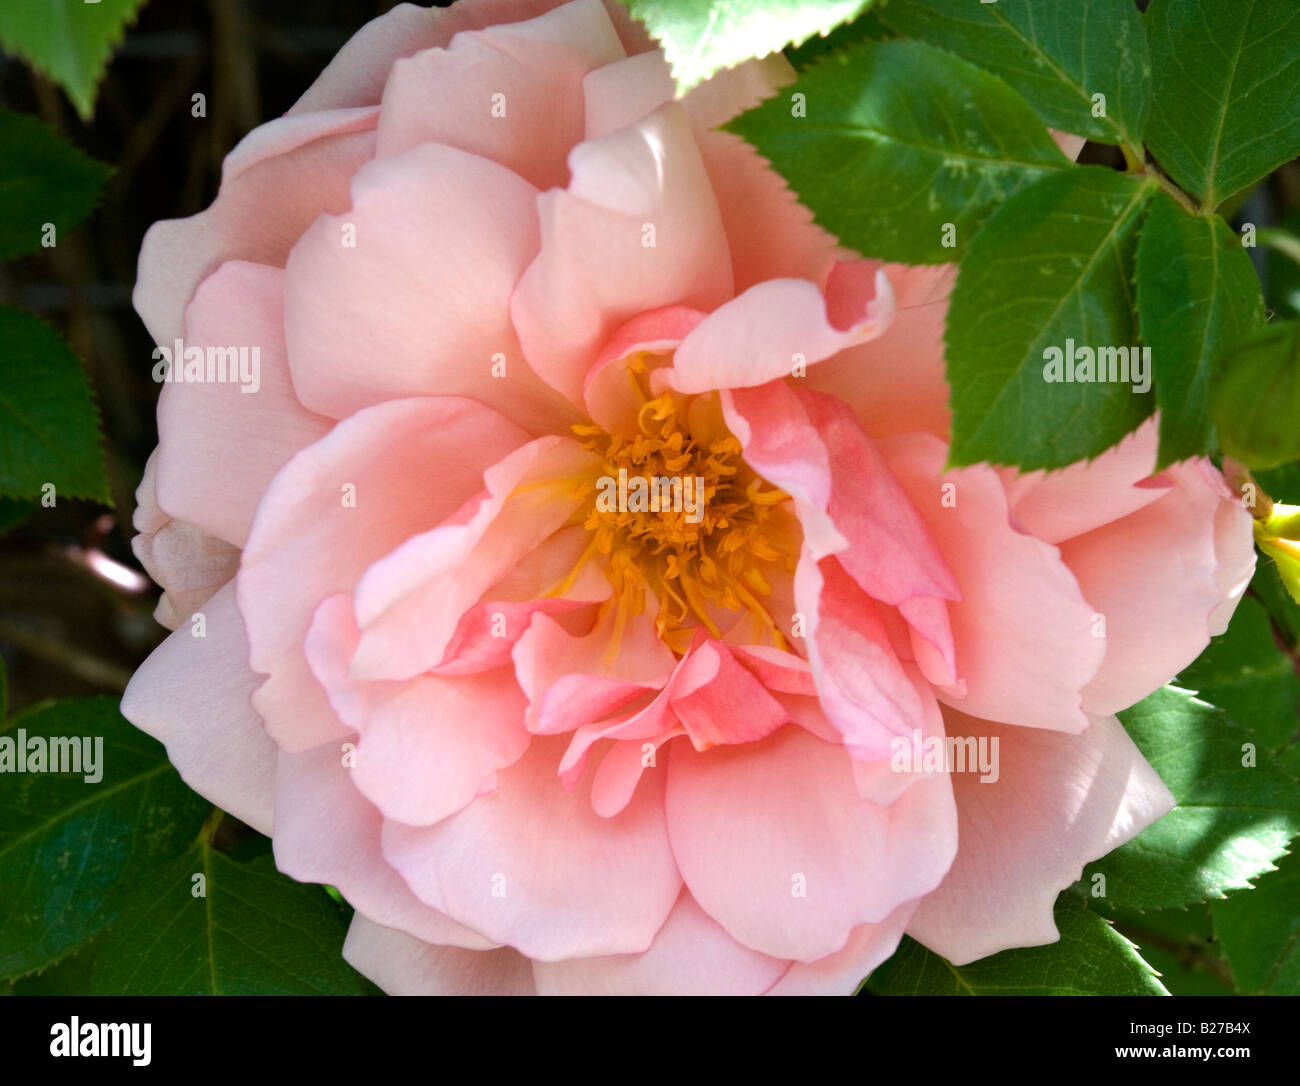 Rose Albertine High Resolution Stock Photography and Images - Alamy